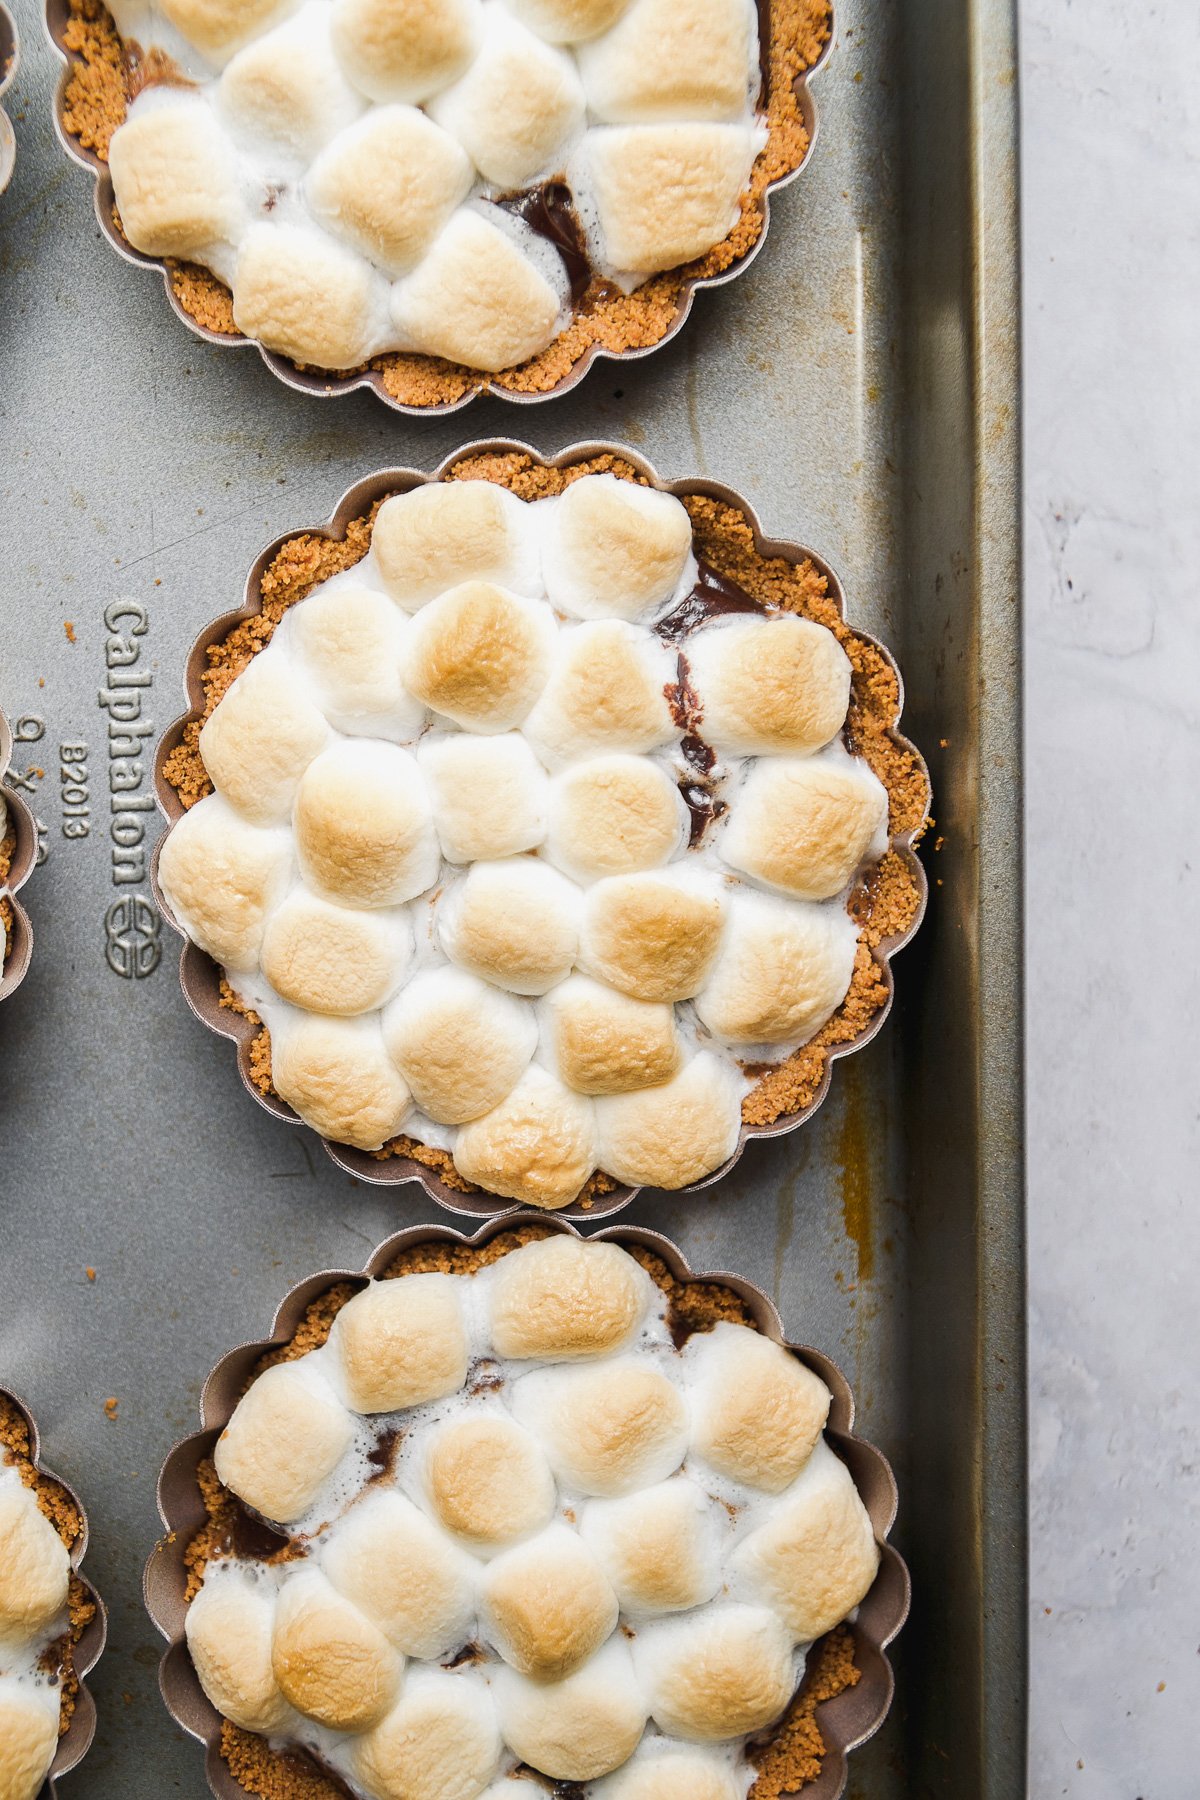 Mini s'mores pies on a baking pan with toasted marshmallows on top.